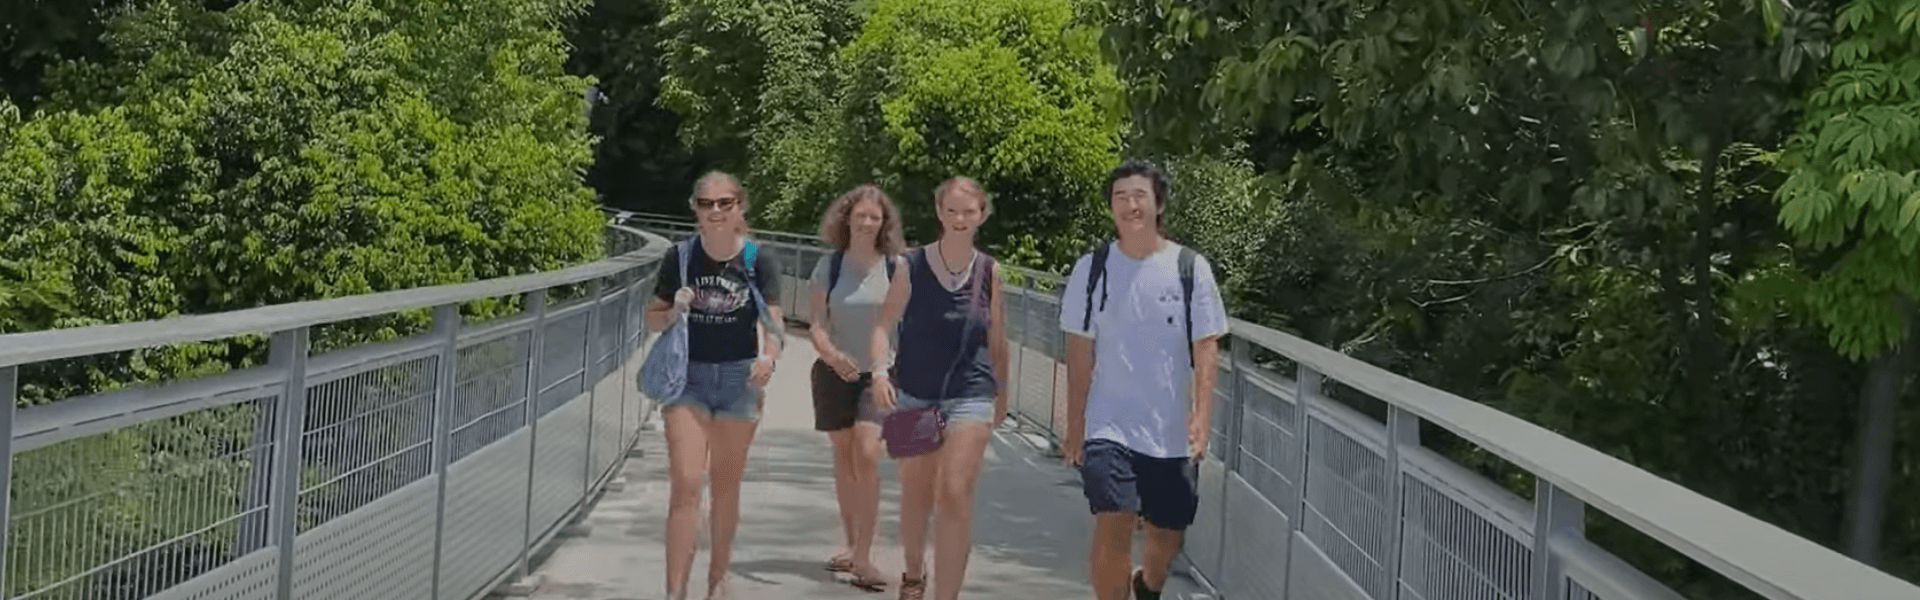 Building Global Connections: CGA Students Meet in Singapore